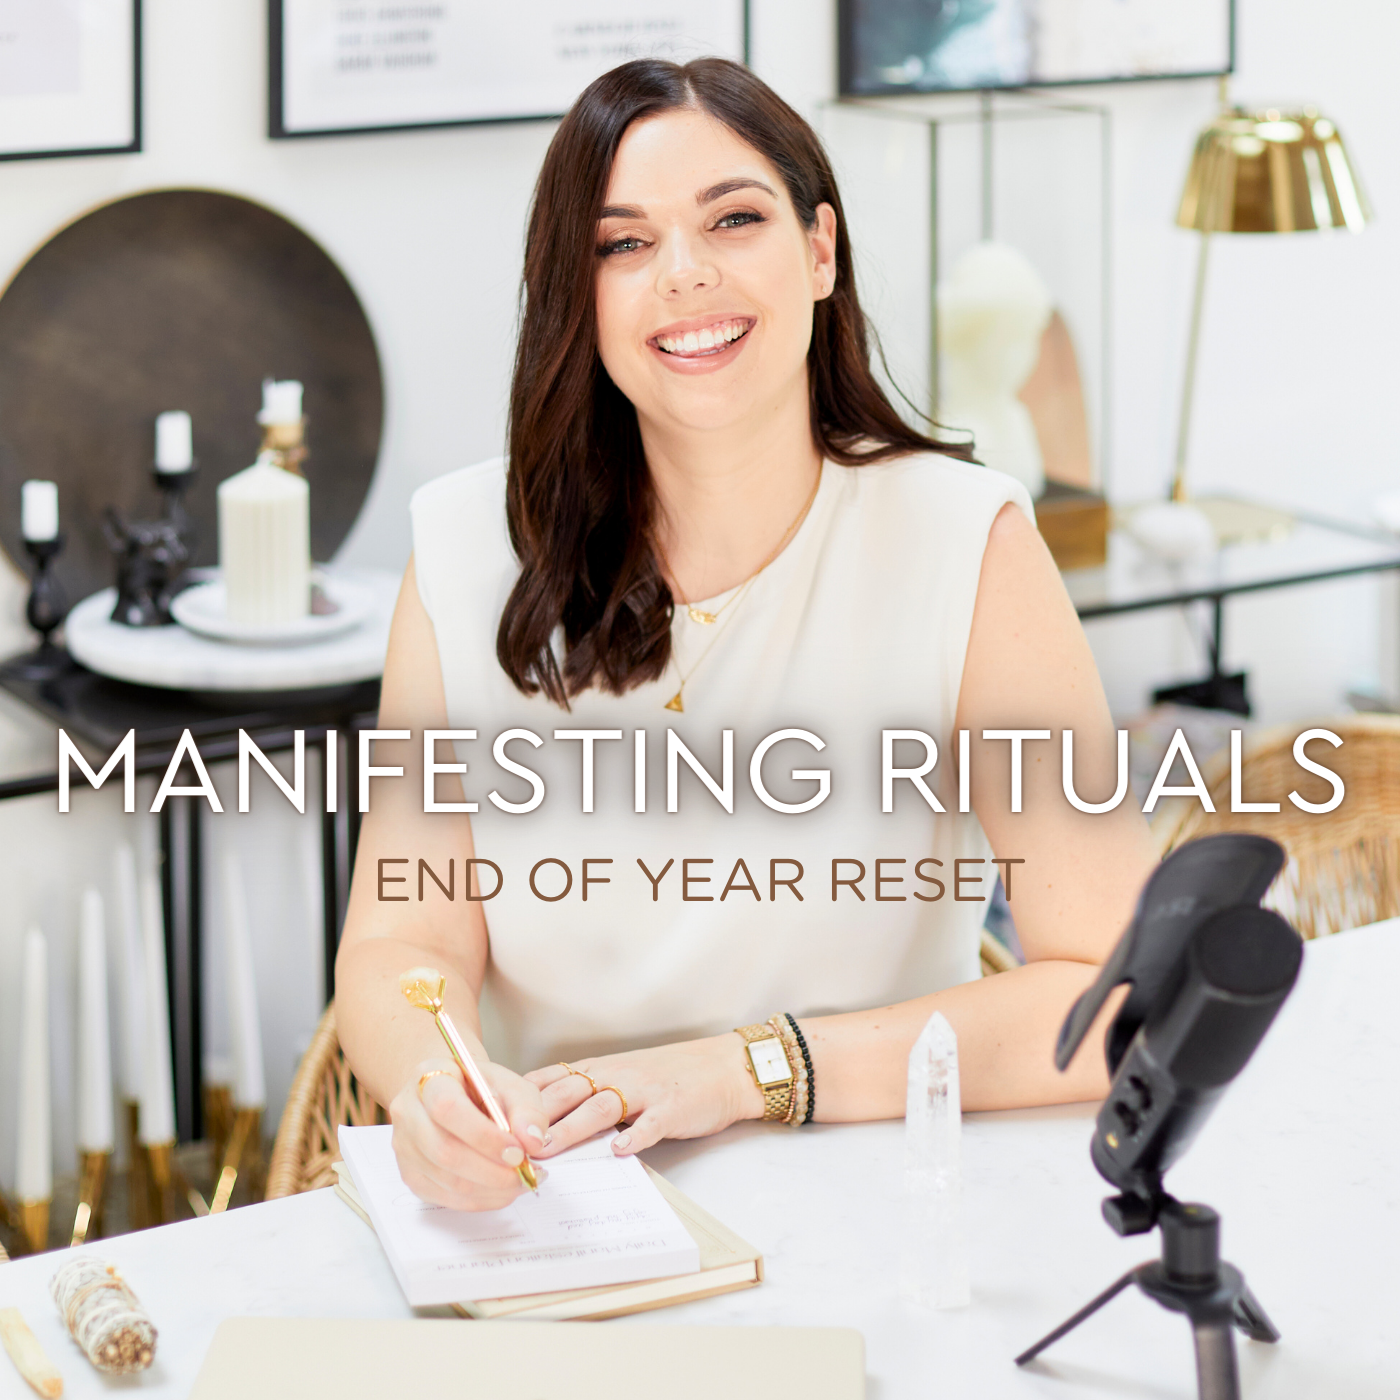 MANIFESTING RITUALS: END OF YEAR RESET